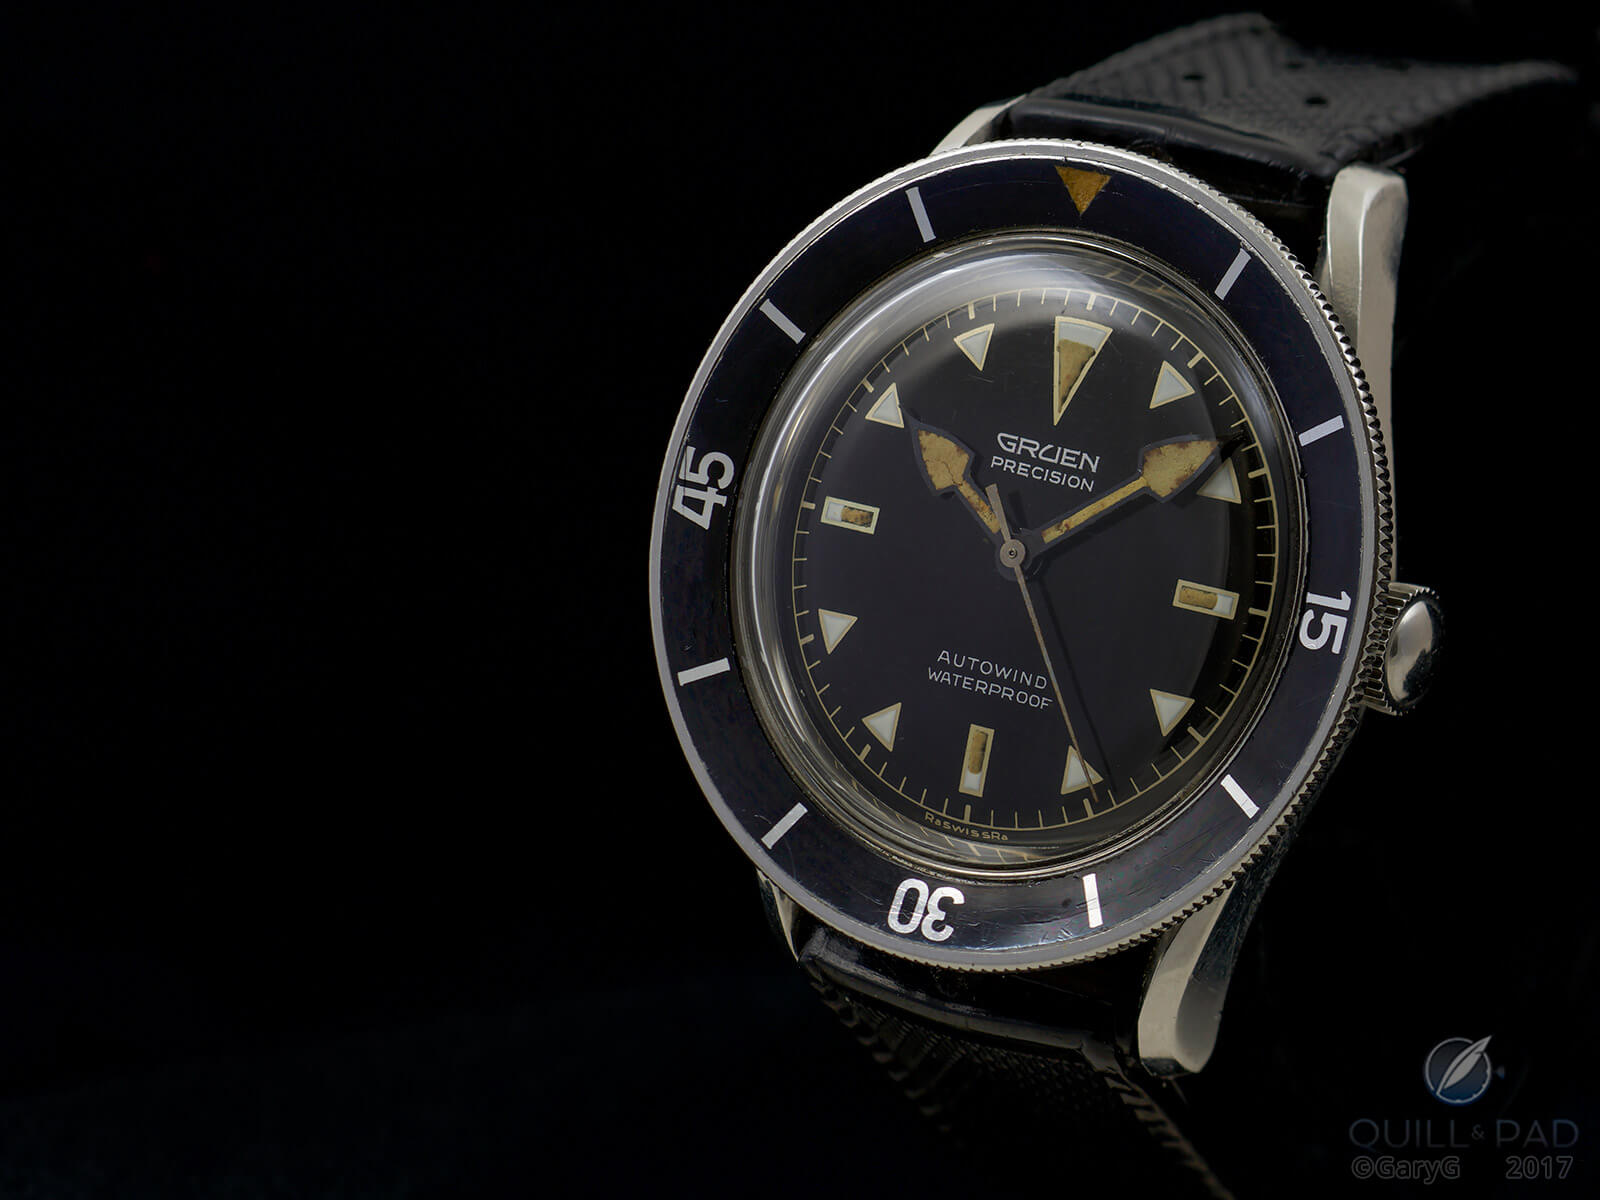 Available online or in person: Gruen Superocean Diver at Analog/Shift